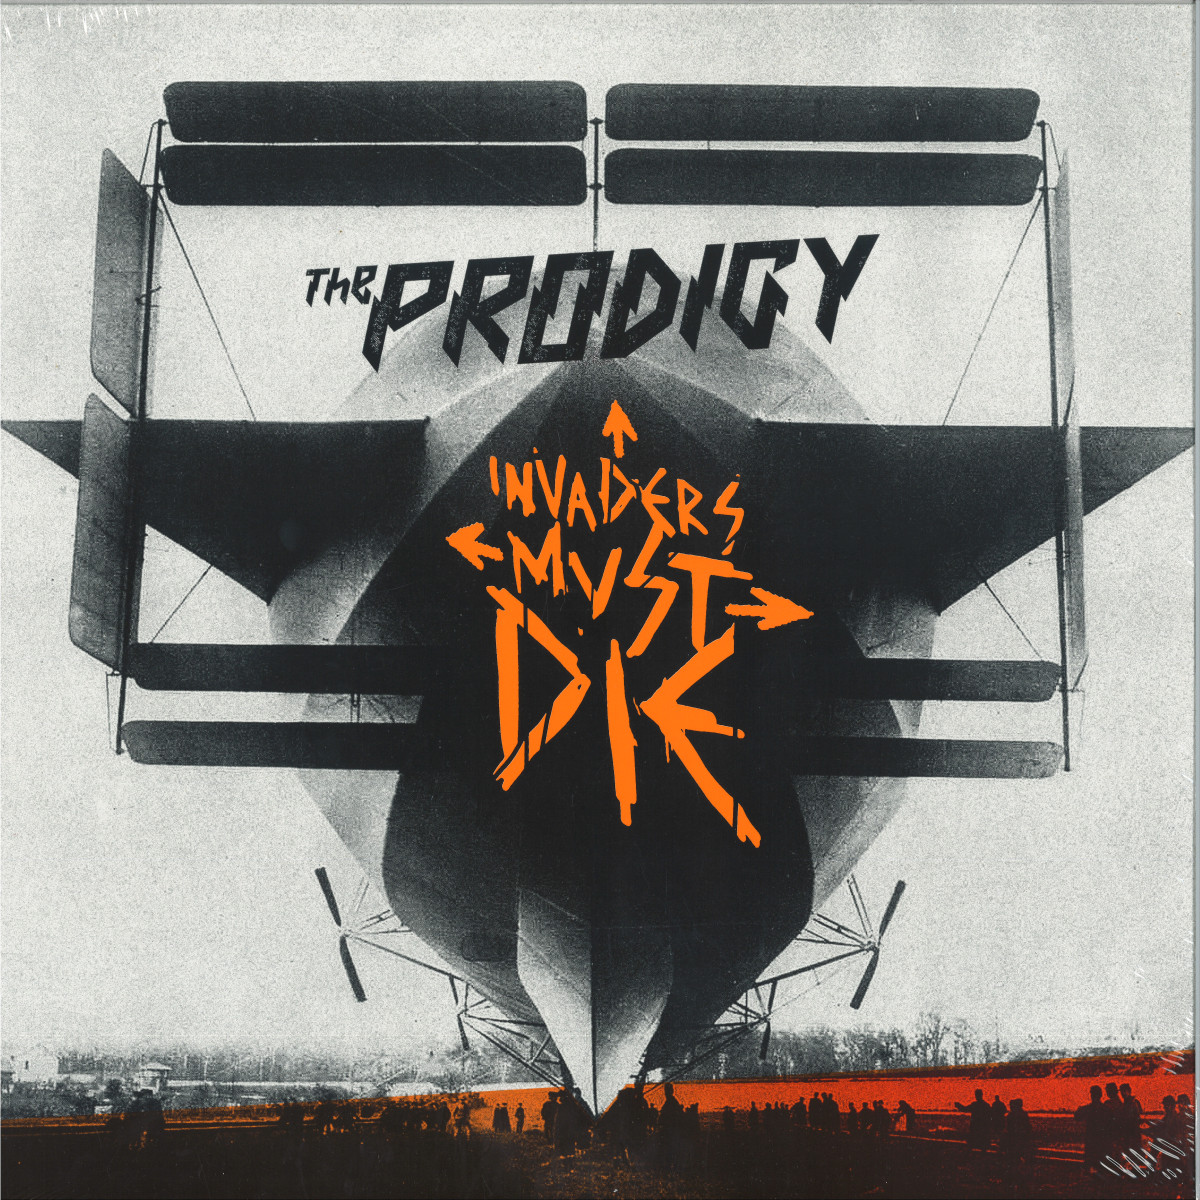 The Prodigy - Invaders Must Die 2x12" / Take Me to the Hospital HOSPLP001 -  Vinyl